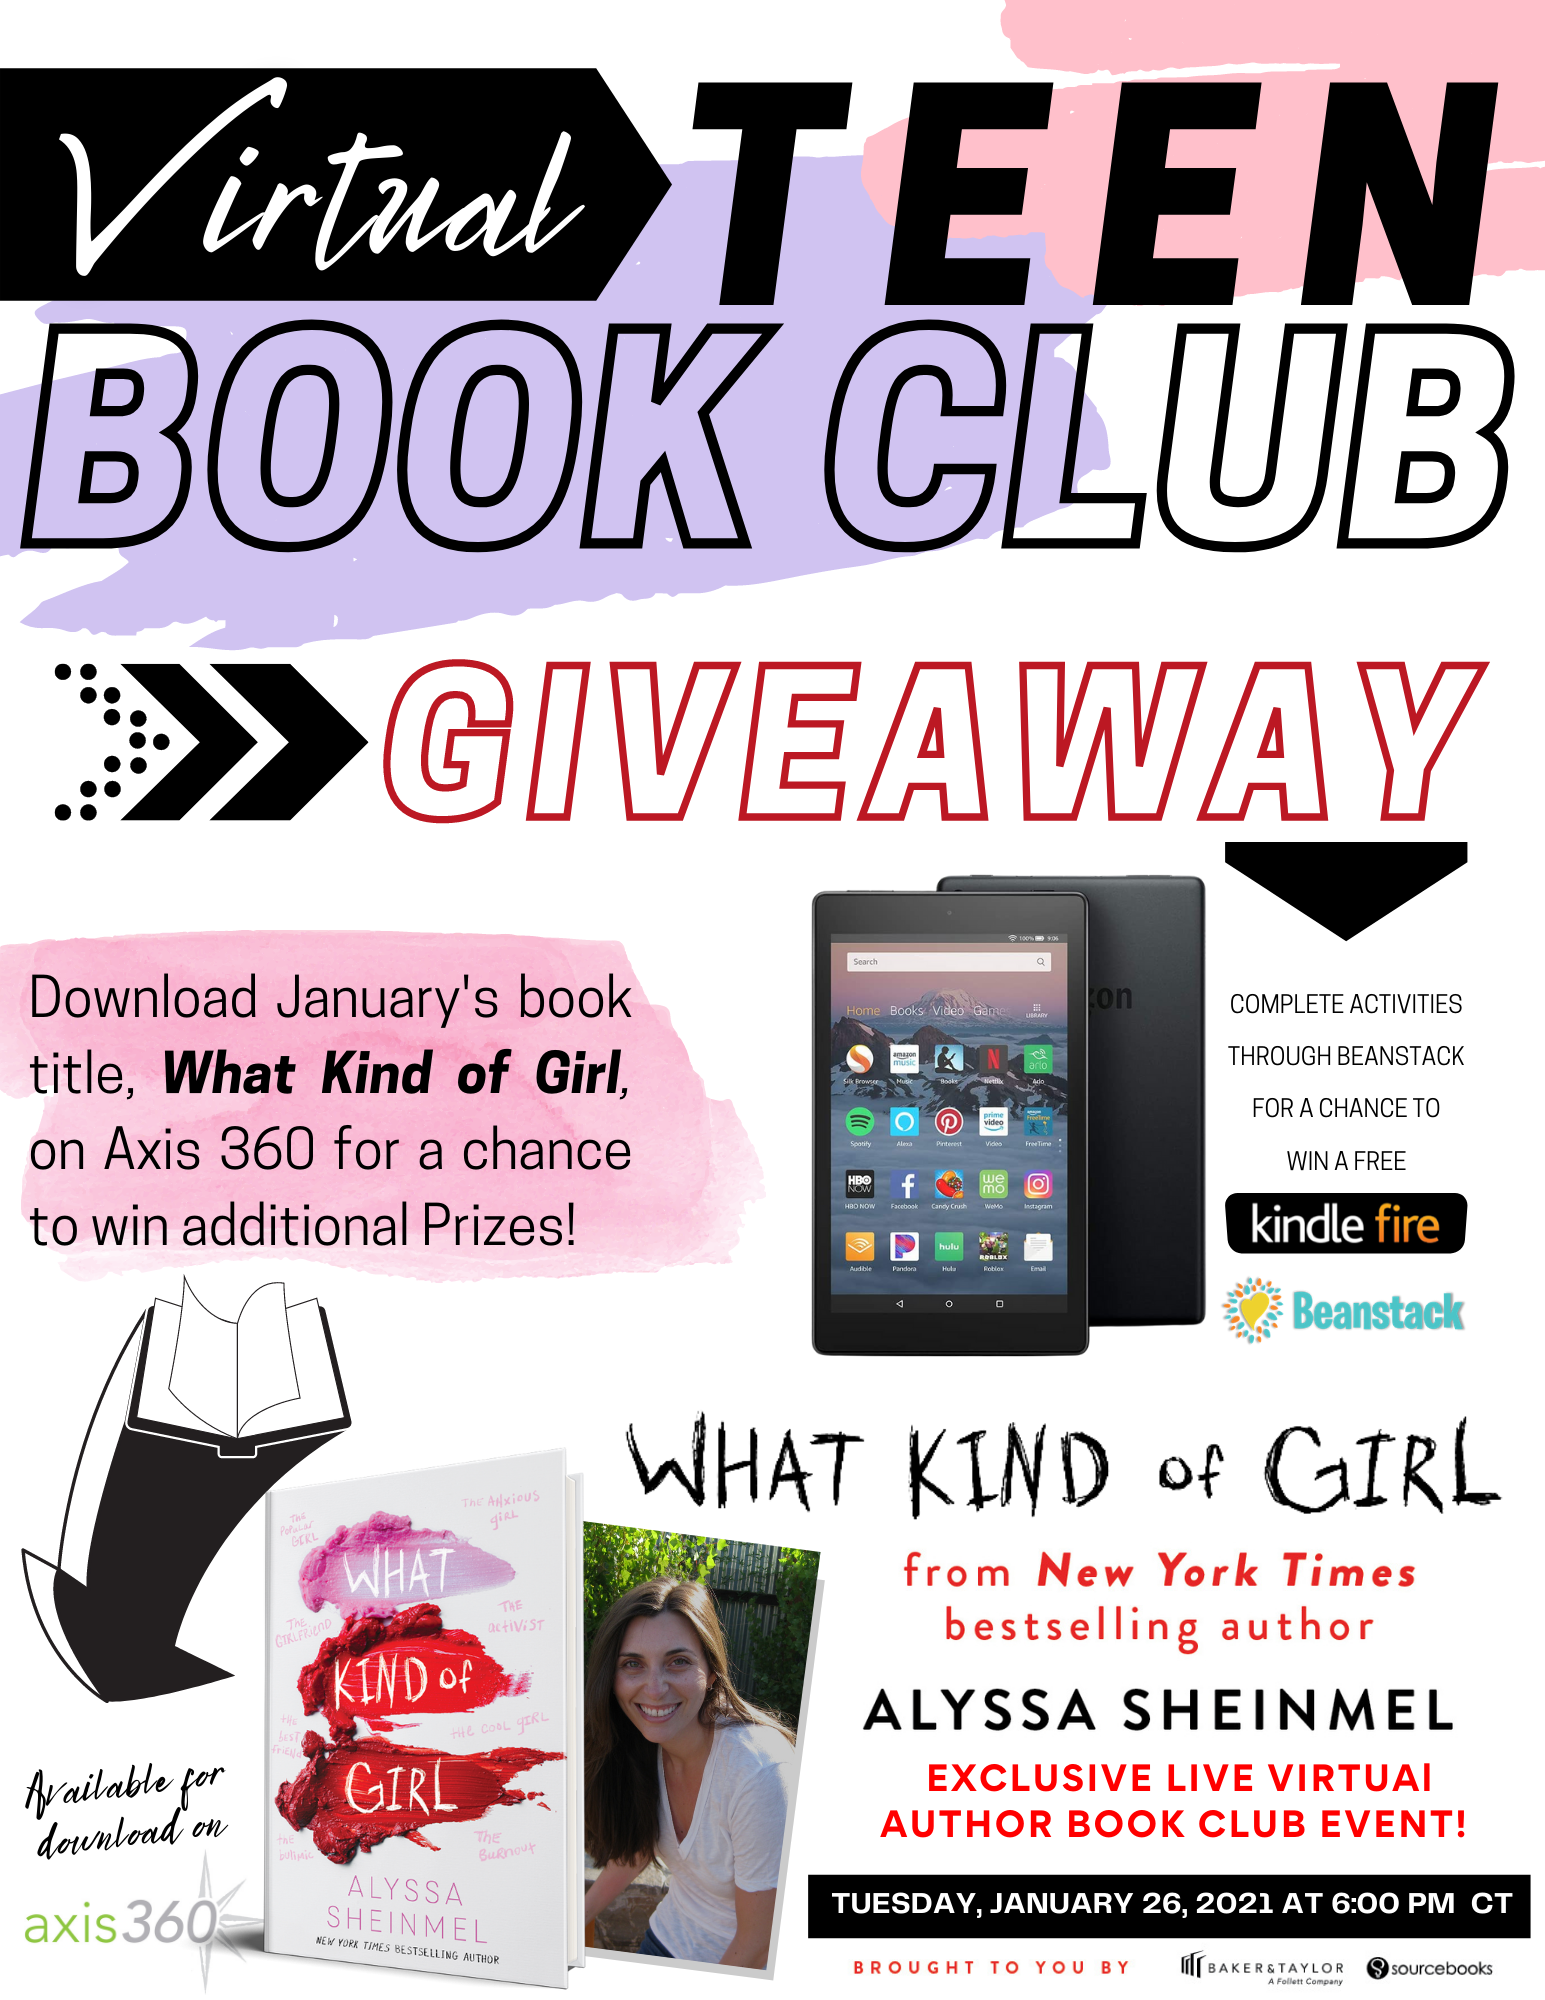 Don't miss out on January's Virtual Teen Book Club title, What Kind of Girl by Alyssa Sheinmel, a New York Times Bestselling Author.